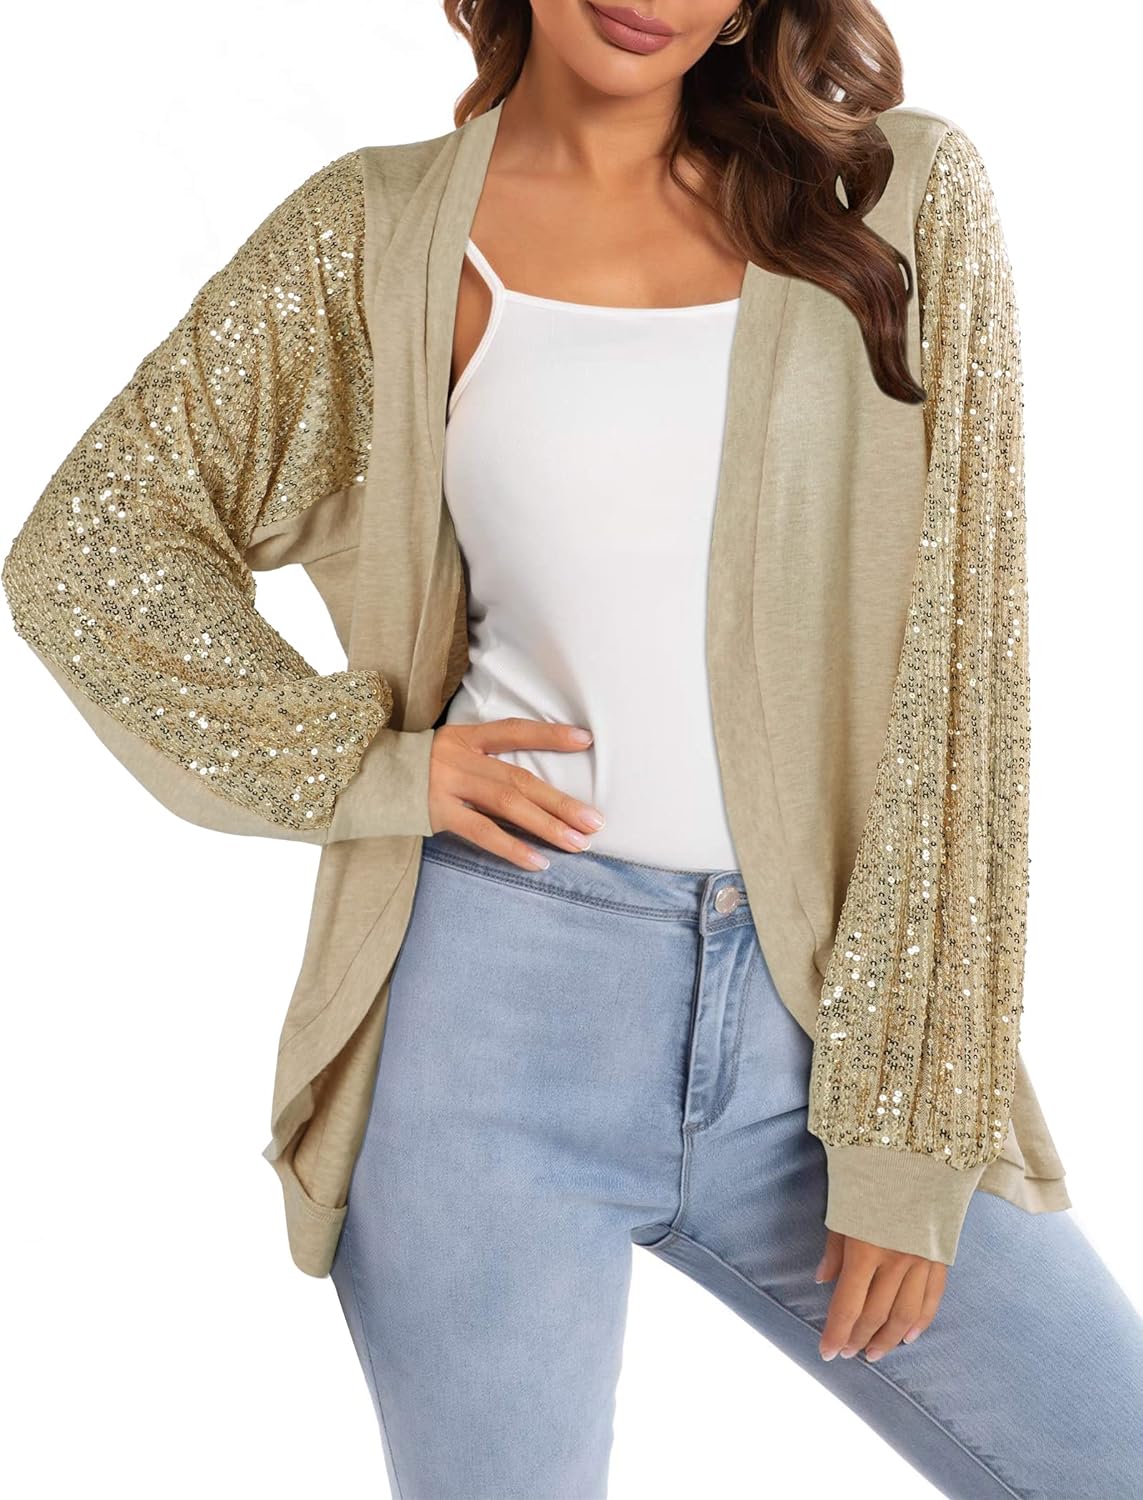 ALLTB Sequin Cardigans for Women Sparkly Long Sleeve Shirts Tops Open Front Outerwear Coat Shimmer Glitter Loose Jackets